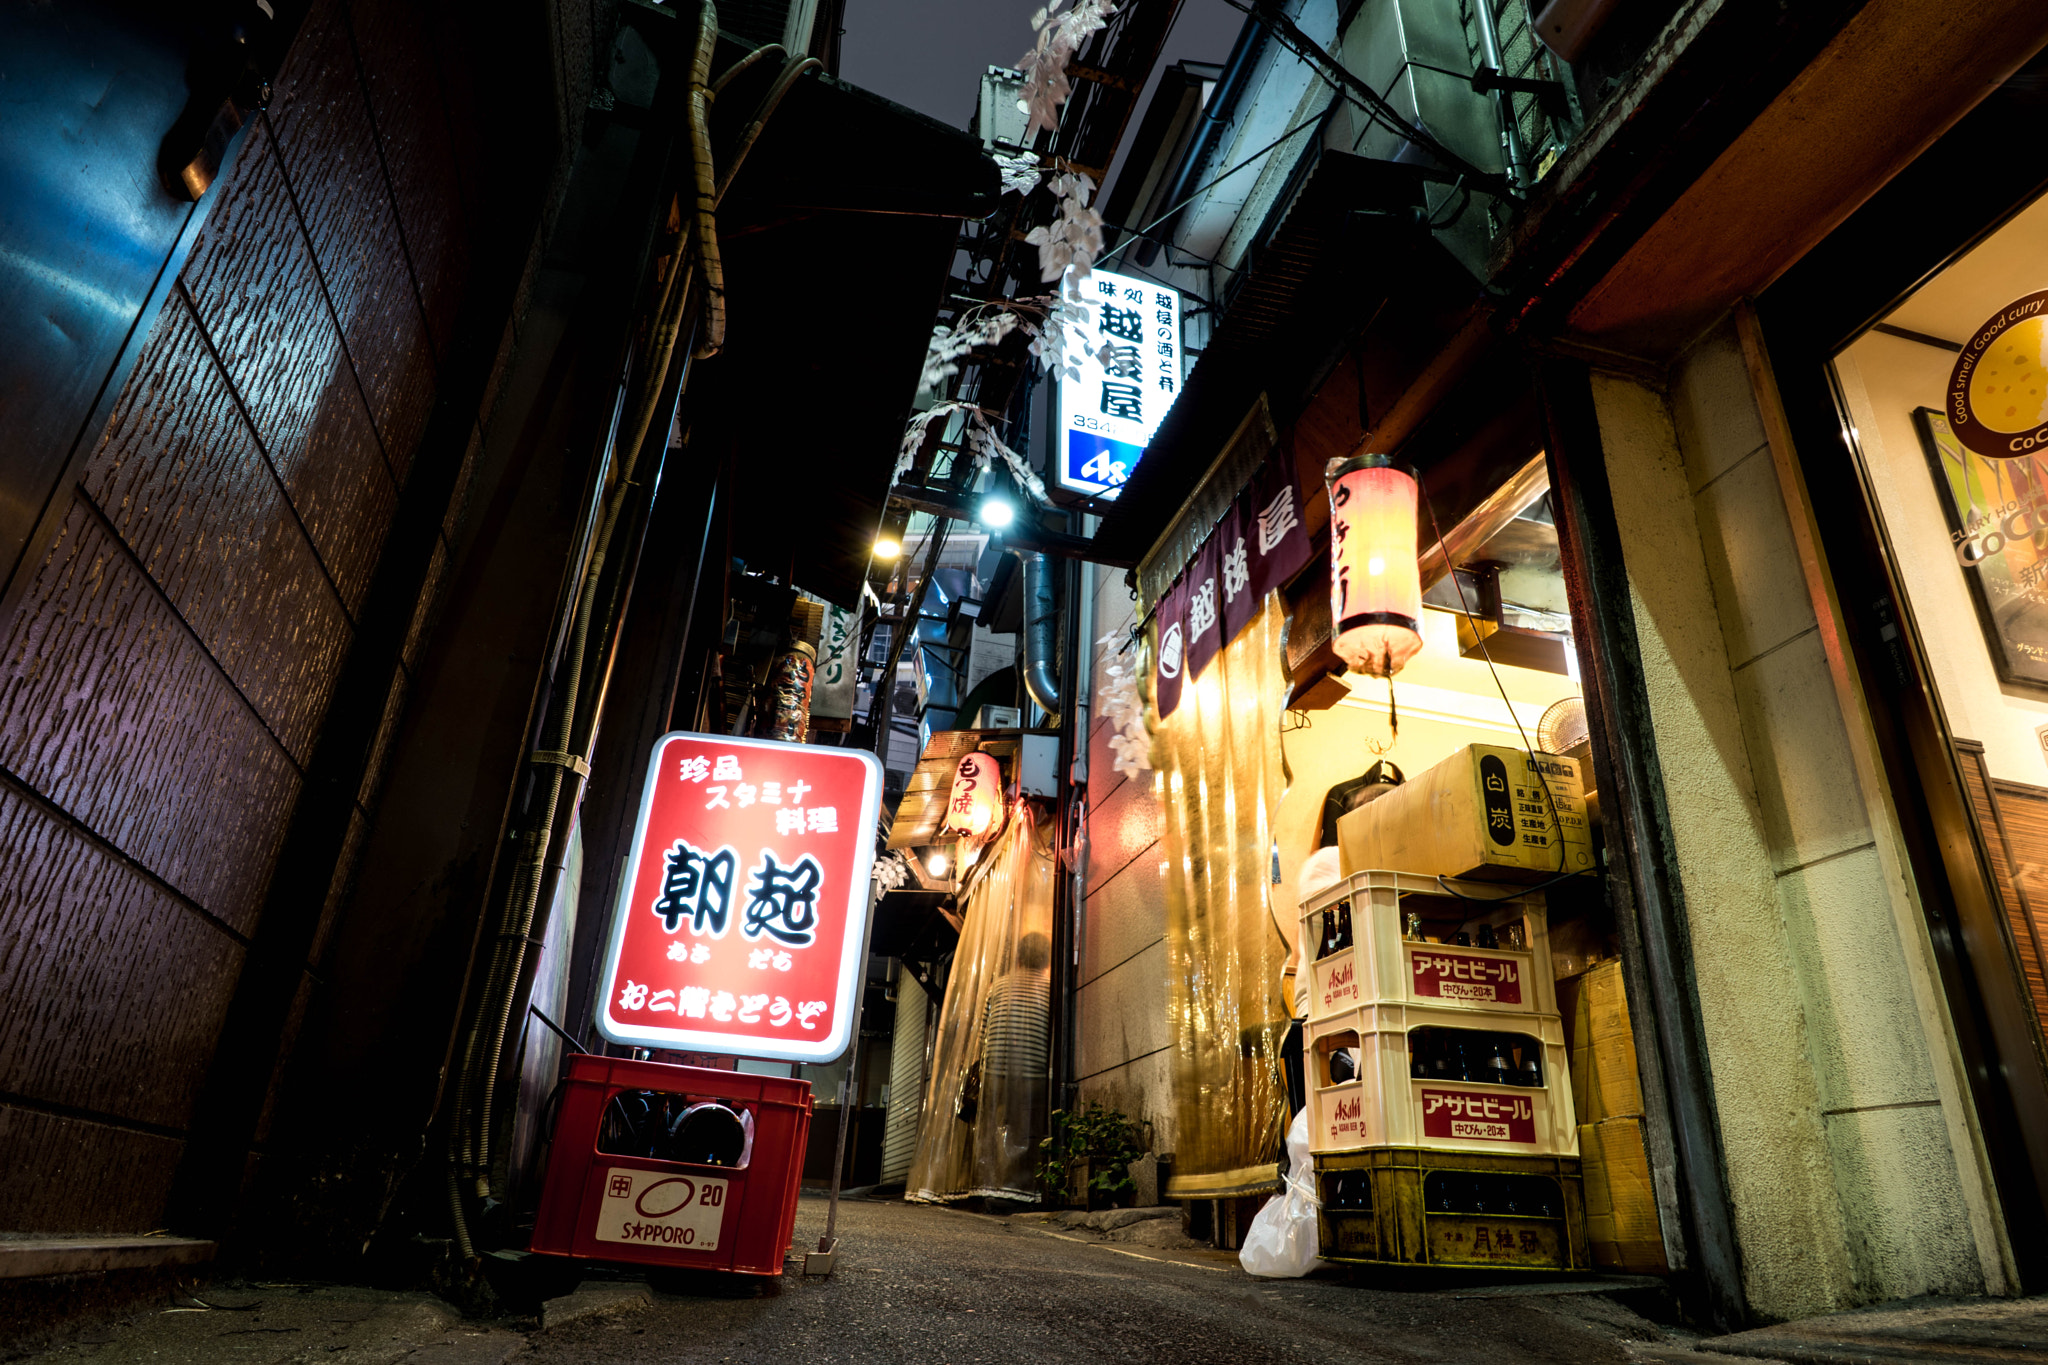 FE 21mm F2.8 sample photo. The quiet alley photography